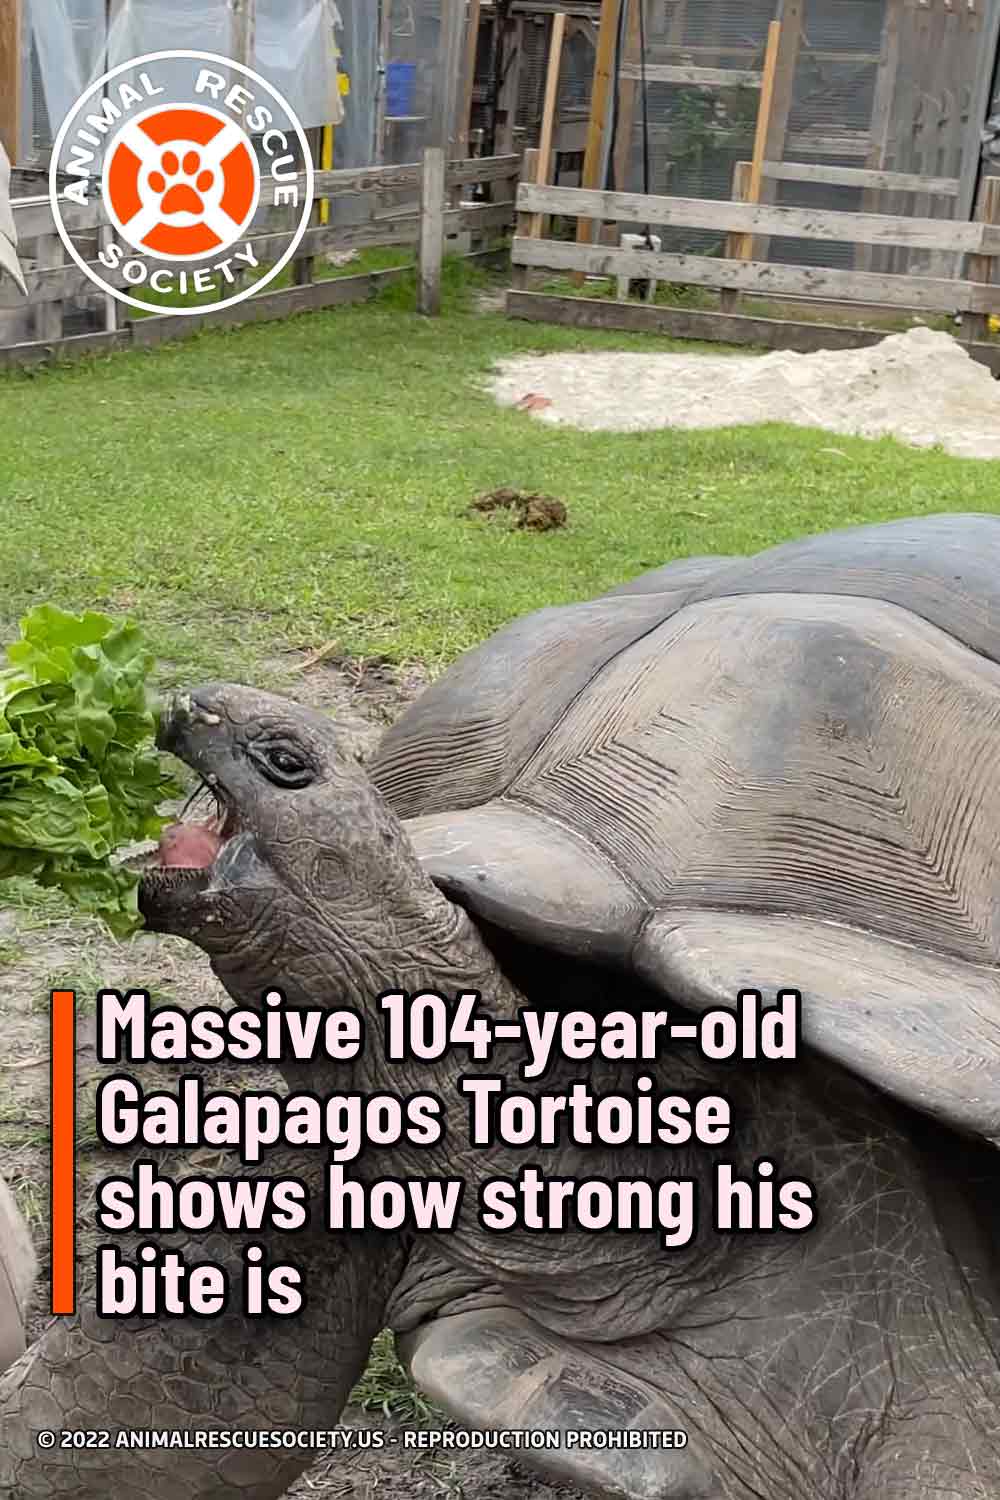 Massive 104-year-old Galapagos Tortoise shows how strong his bite is